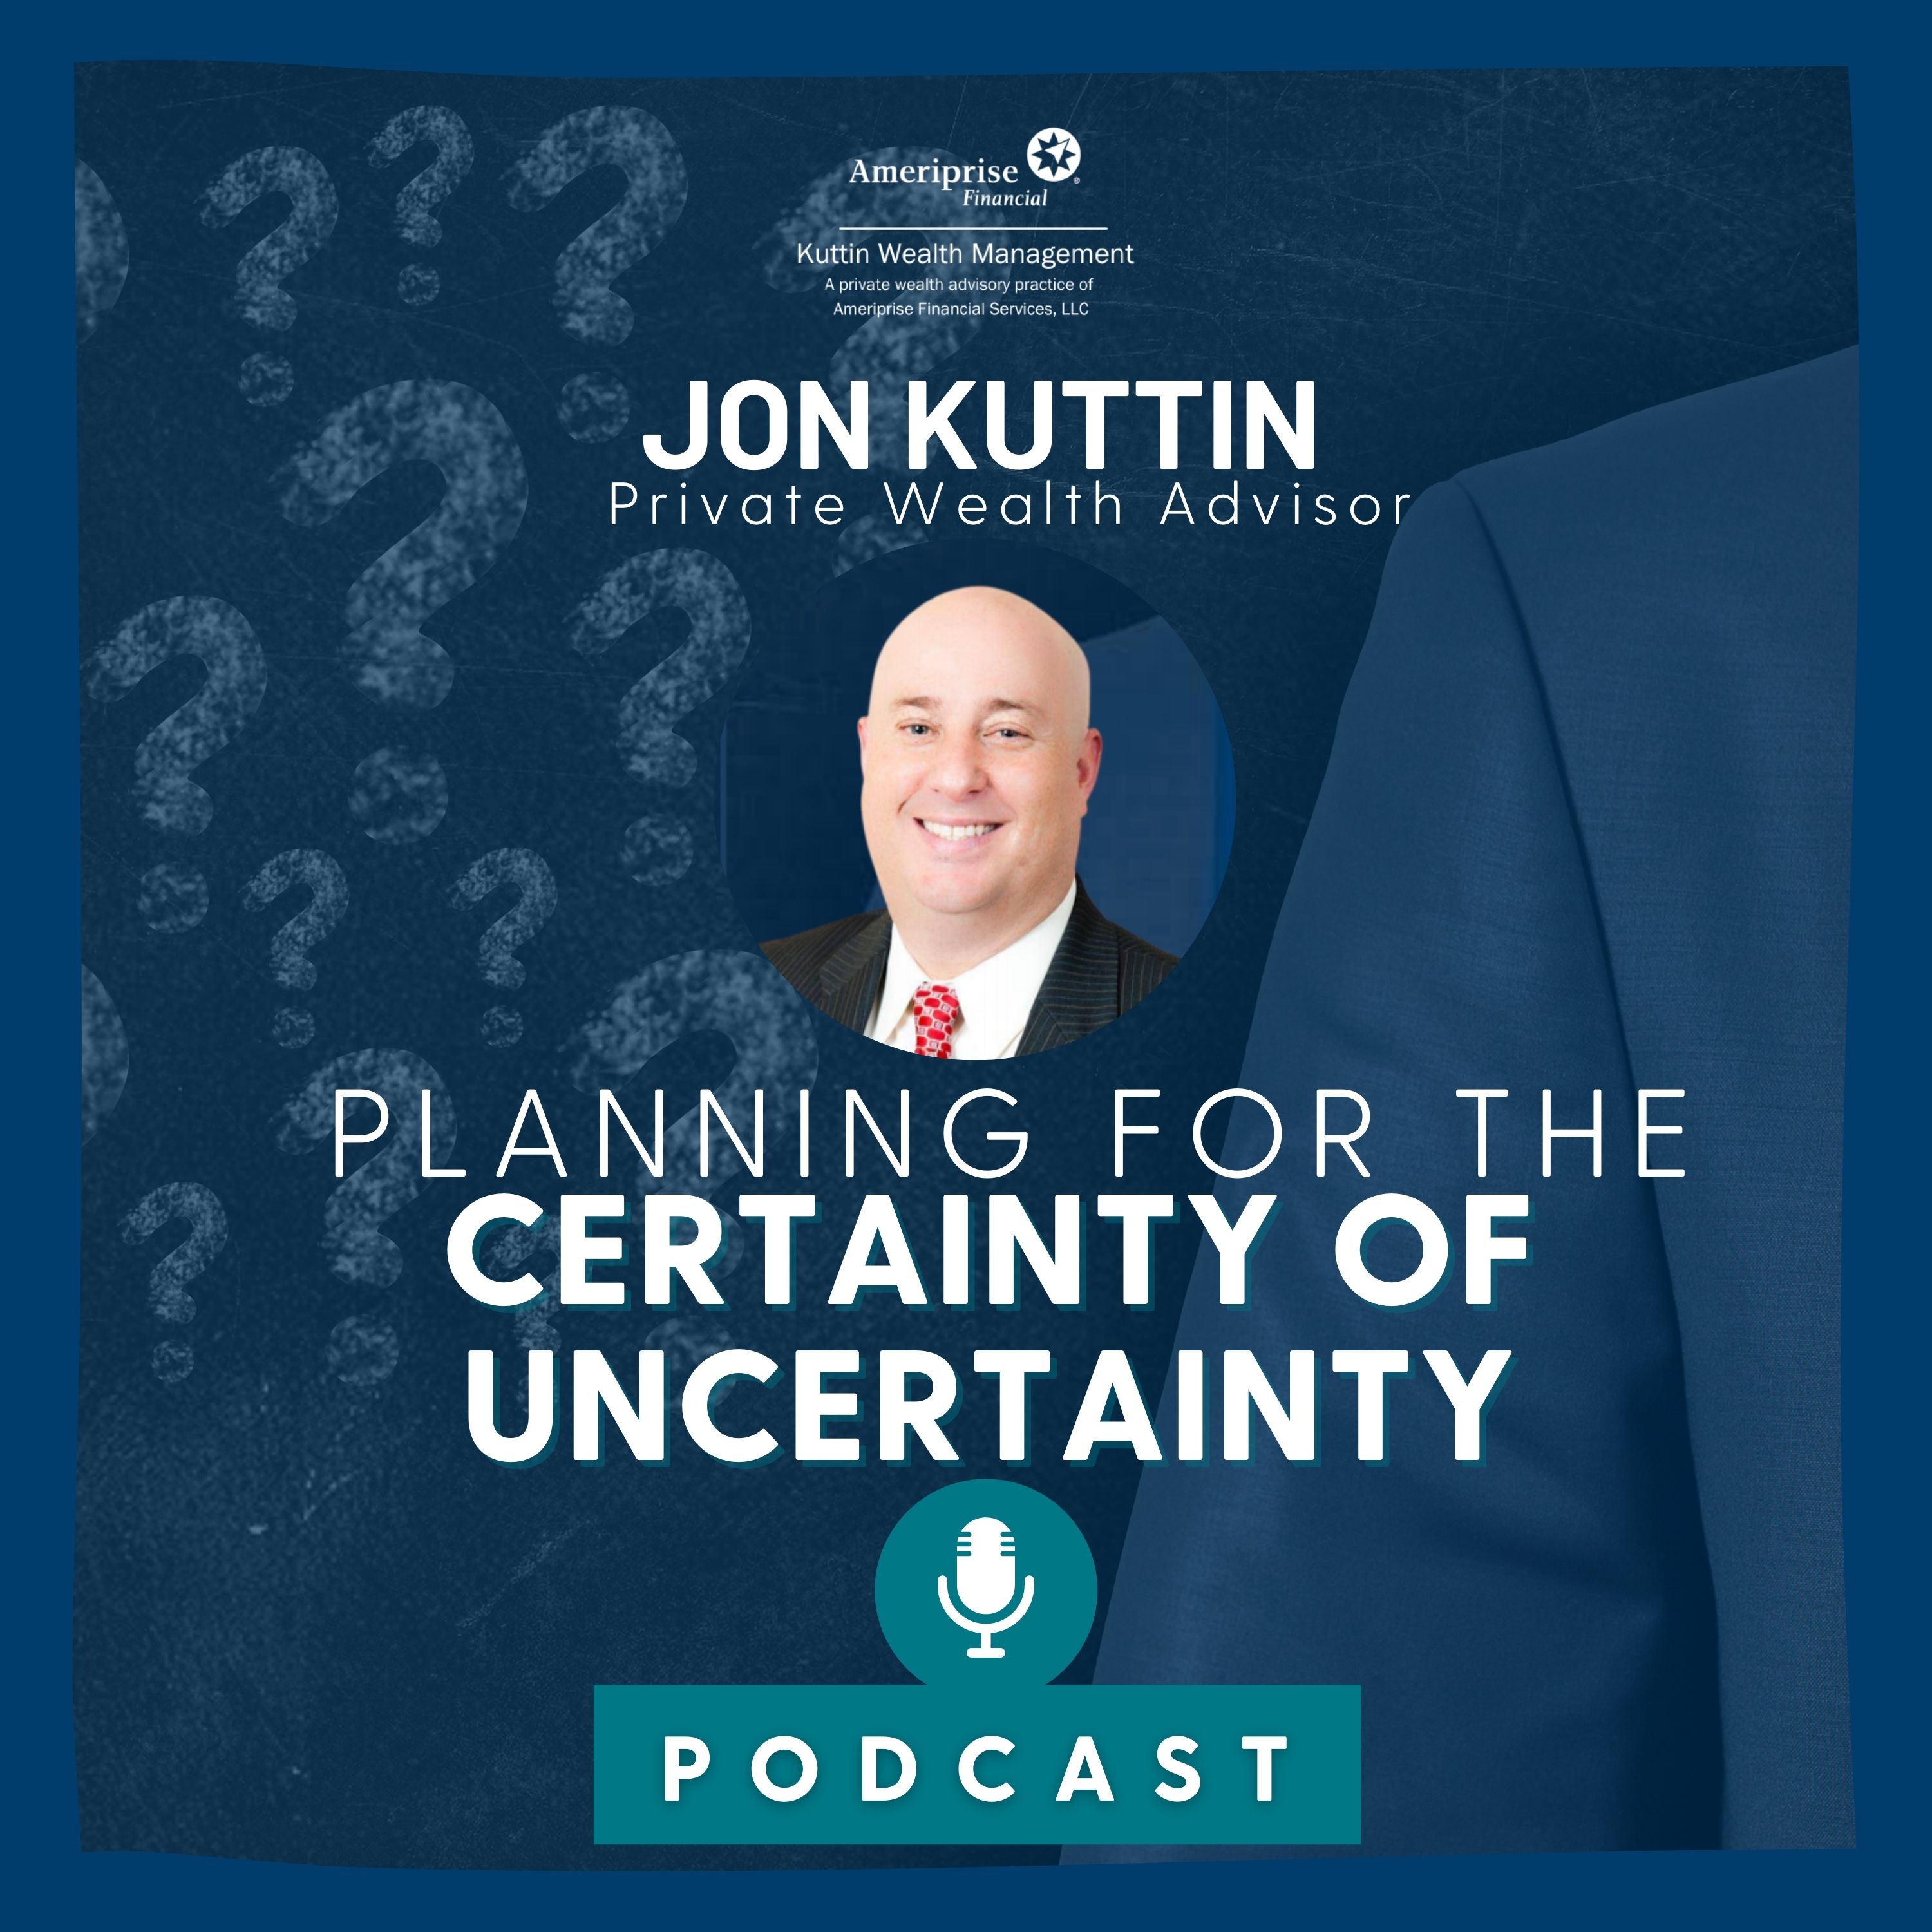 Planning for the Certainty of Uncertainty Podcast with Jonathan Kuttin